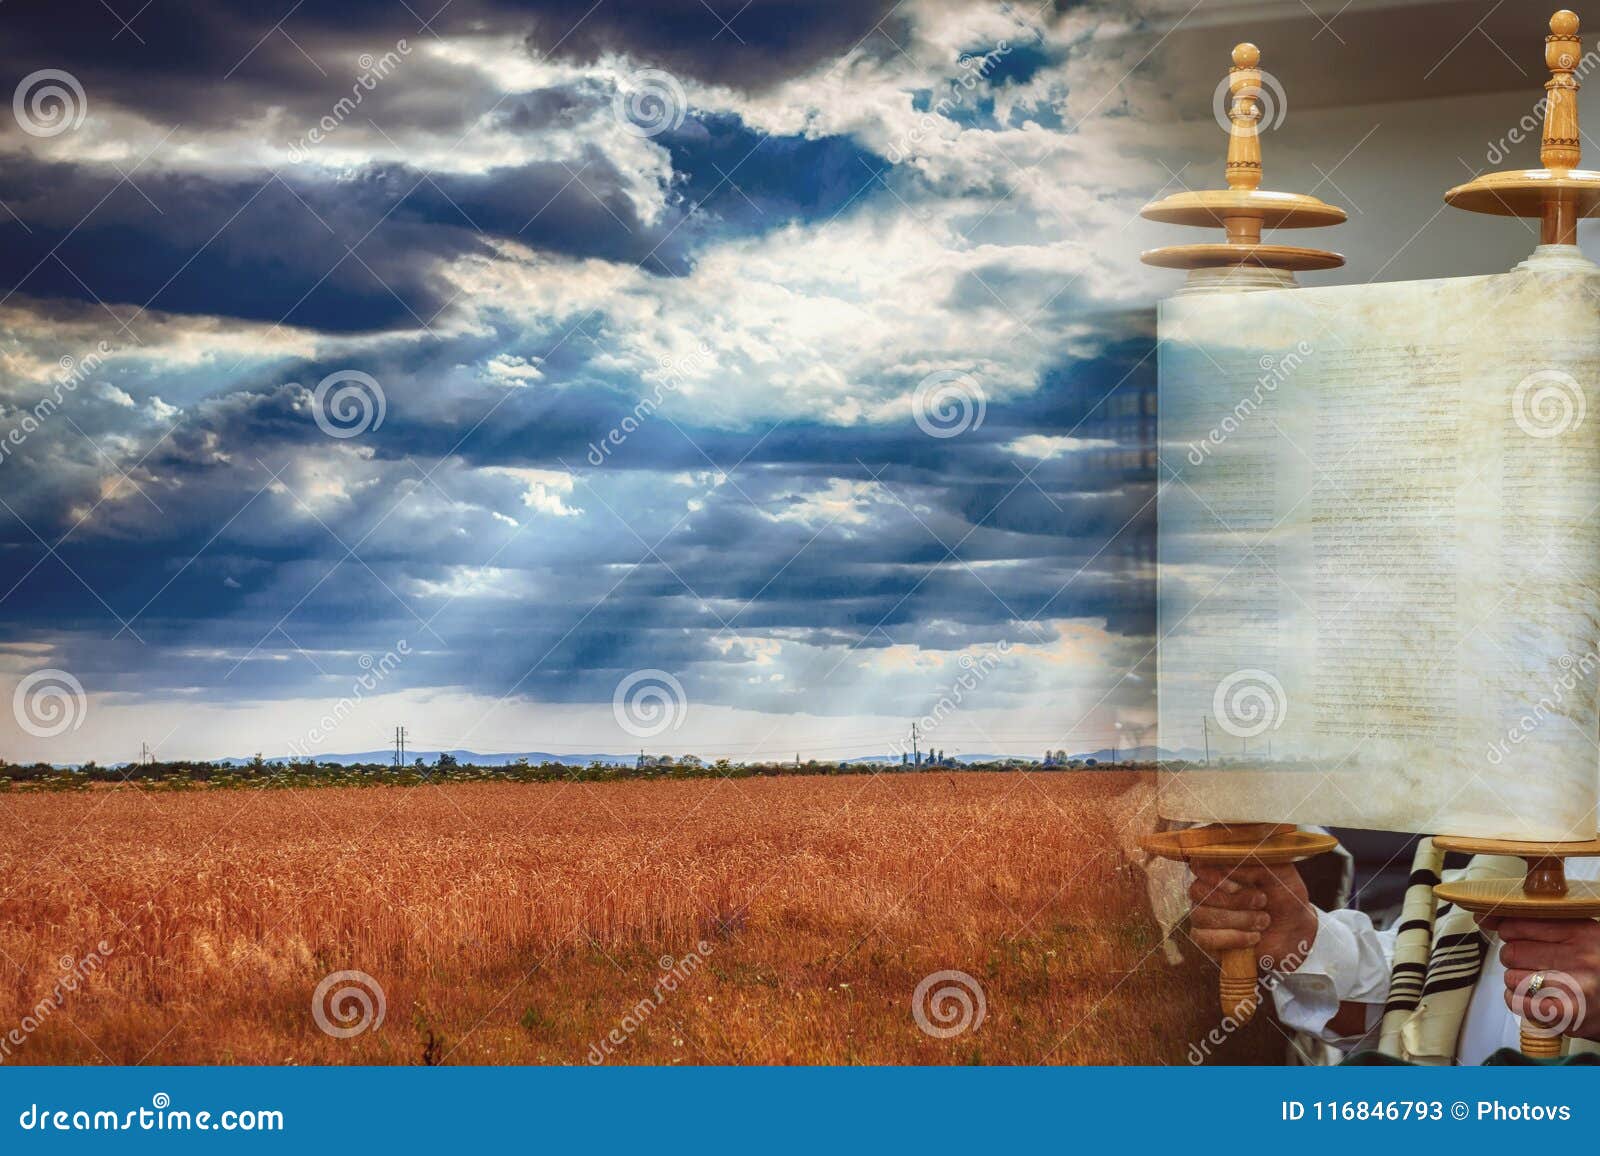 torah scroll during the holy day wheat field, wheat background of shavuot